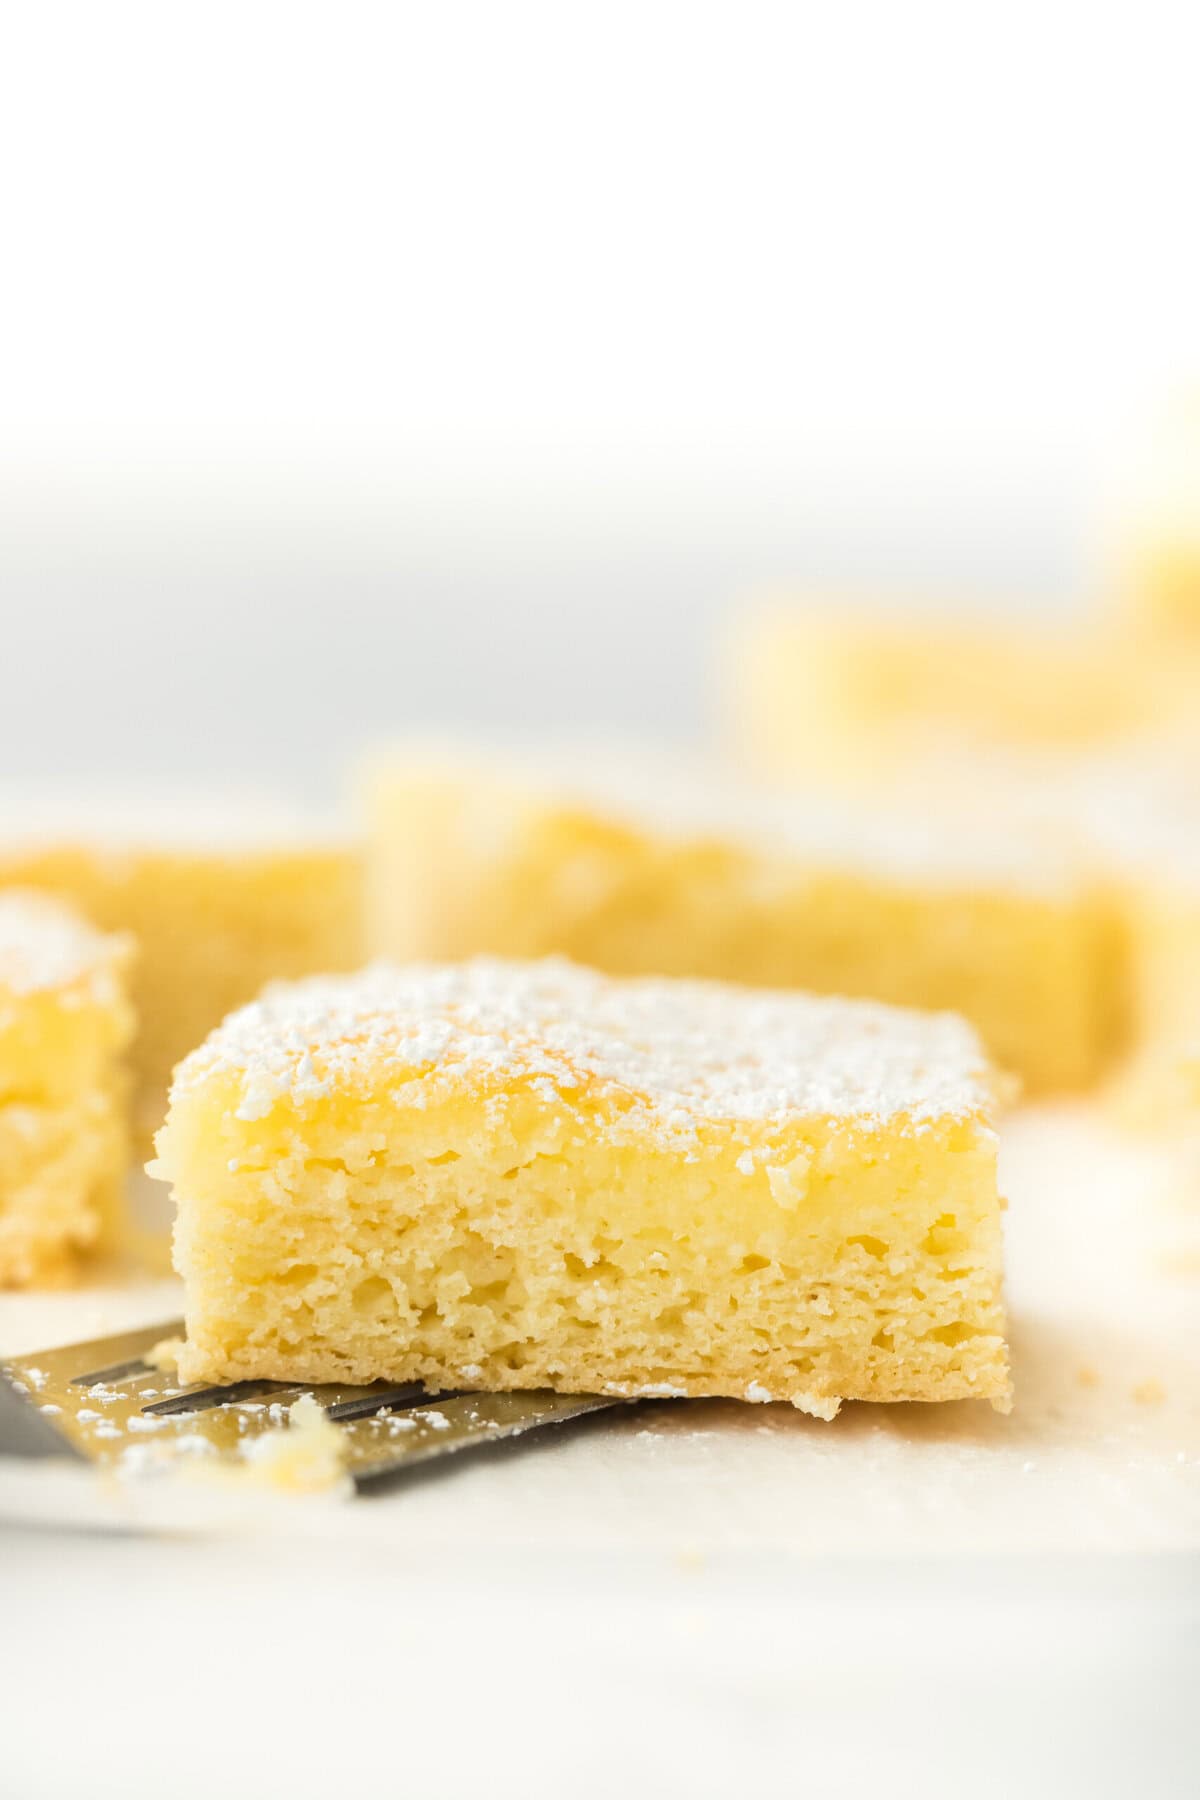 A spatula under a slice of gooey butter cake recipe with some slices in the white background